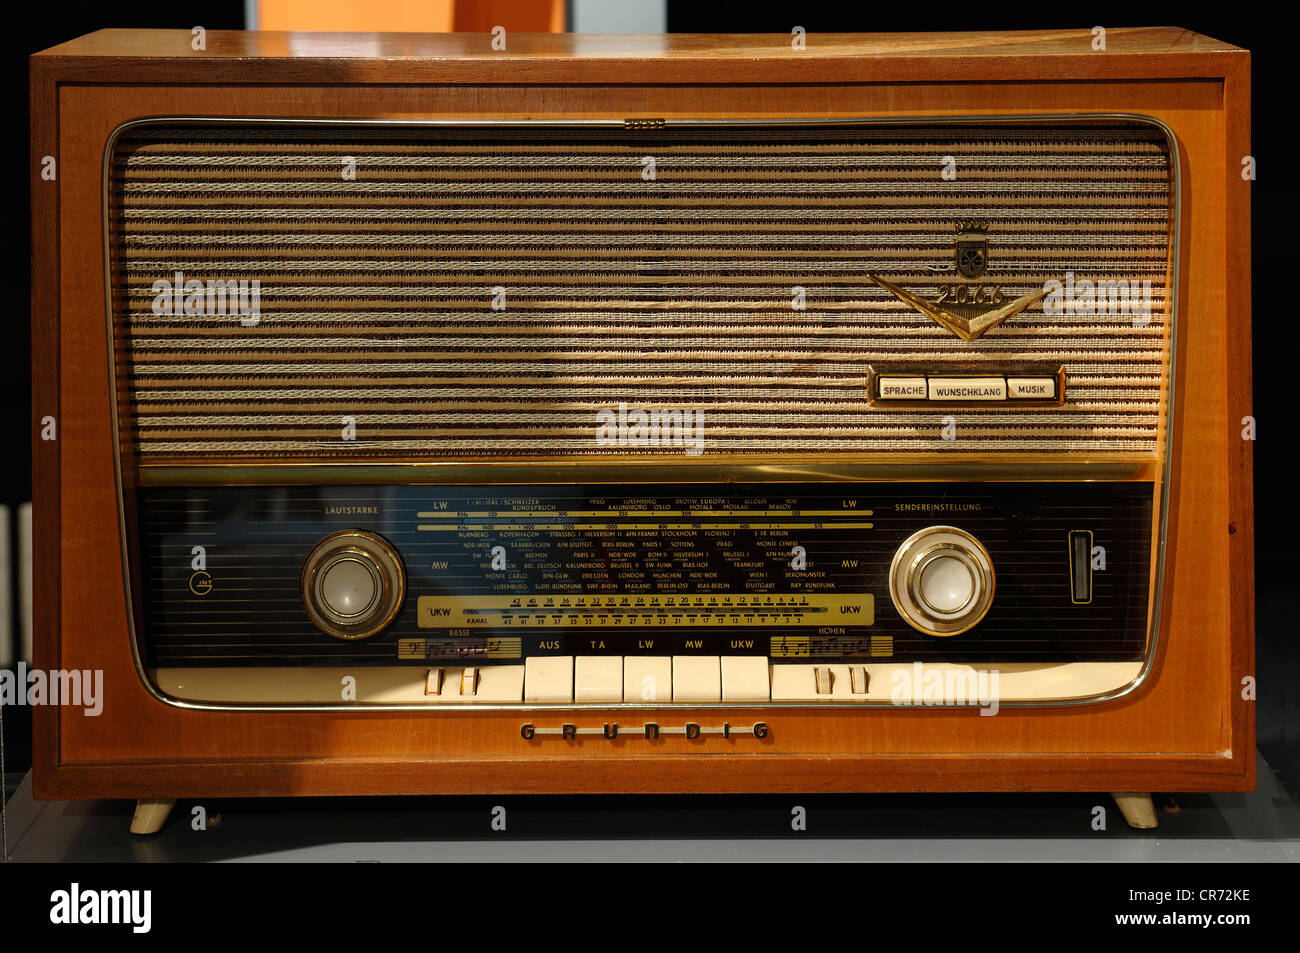 Tube radio 'Grundig 2066' from the 50s, 2011 exhibition, Museum for Industrial Culture, Aeussere Sulzbacher Strasse 60-62 Stock Photo